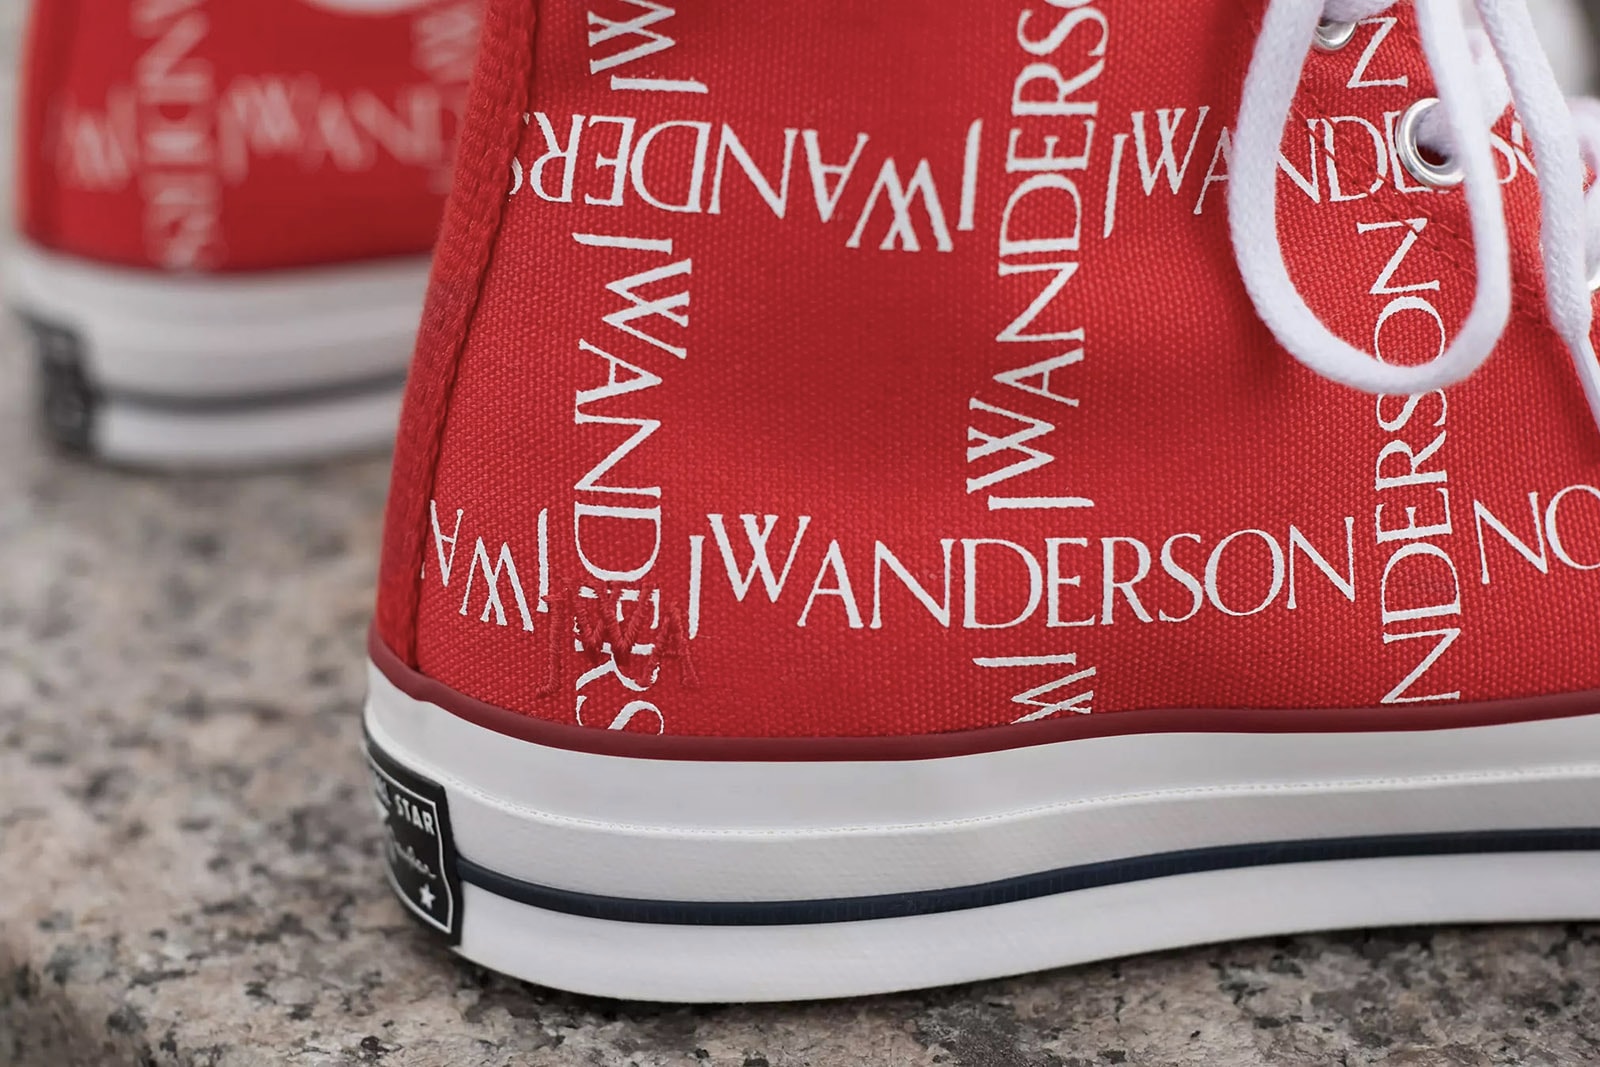 Converse x J.W. Anderson Chuck Taylor 70s Scarlet/White Closer Look Release Details Buy Cop Purchase Available Soon Sneakers Kicks Trainers Shoes Footwear